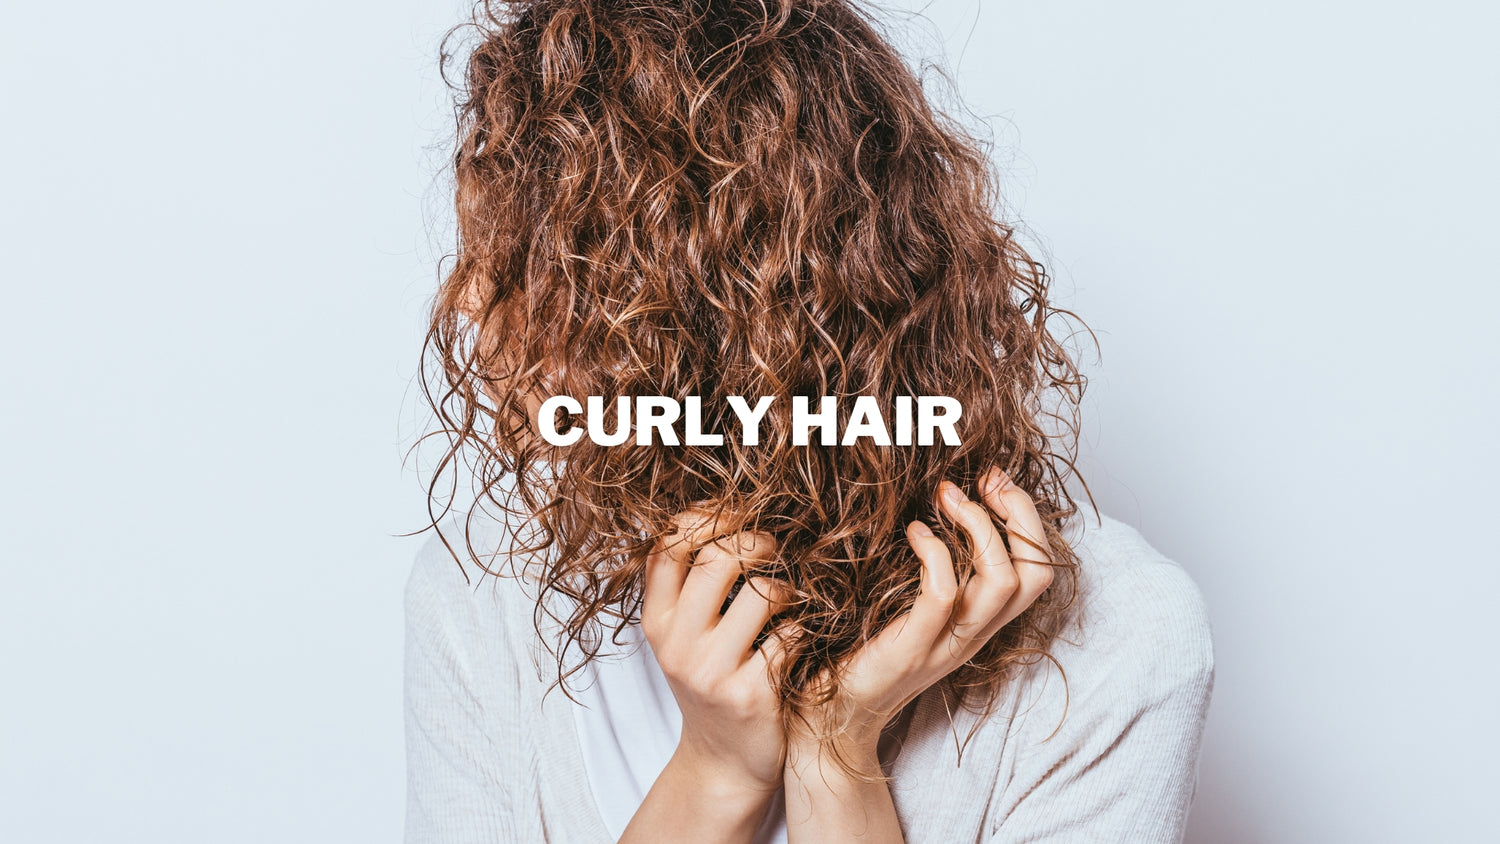 Women using curly hair shampoo for curly hair